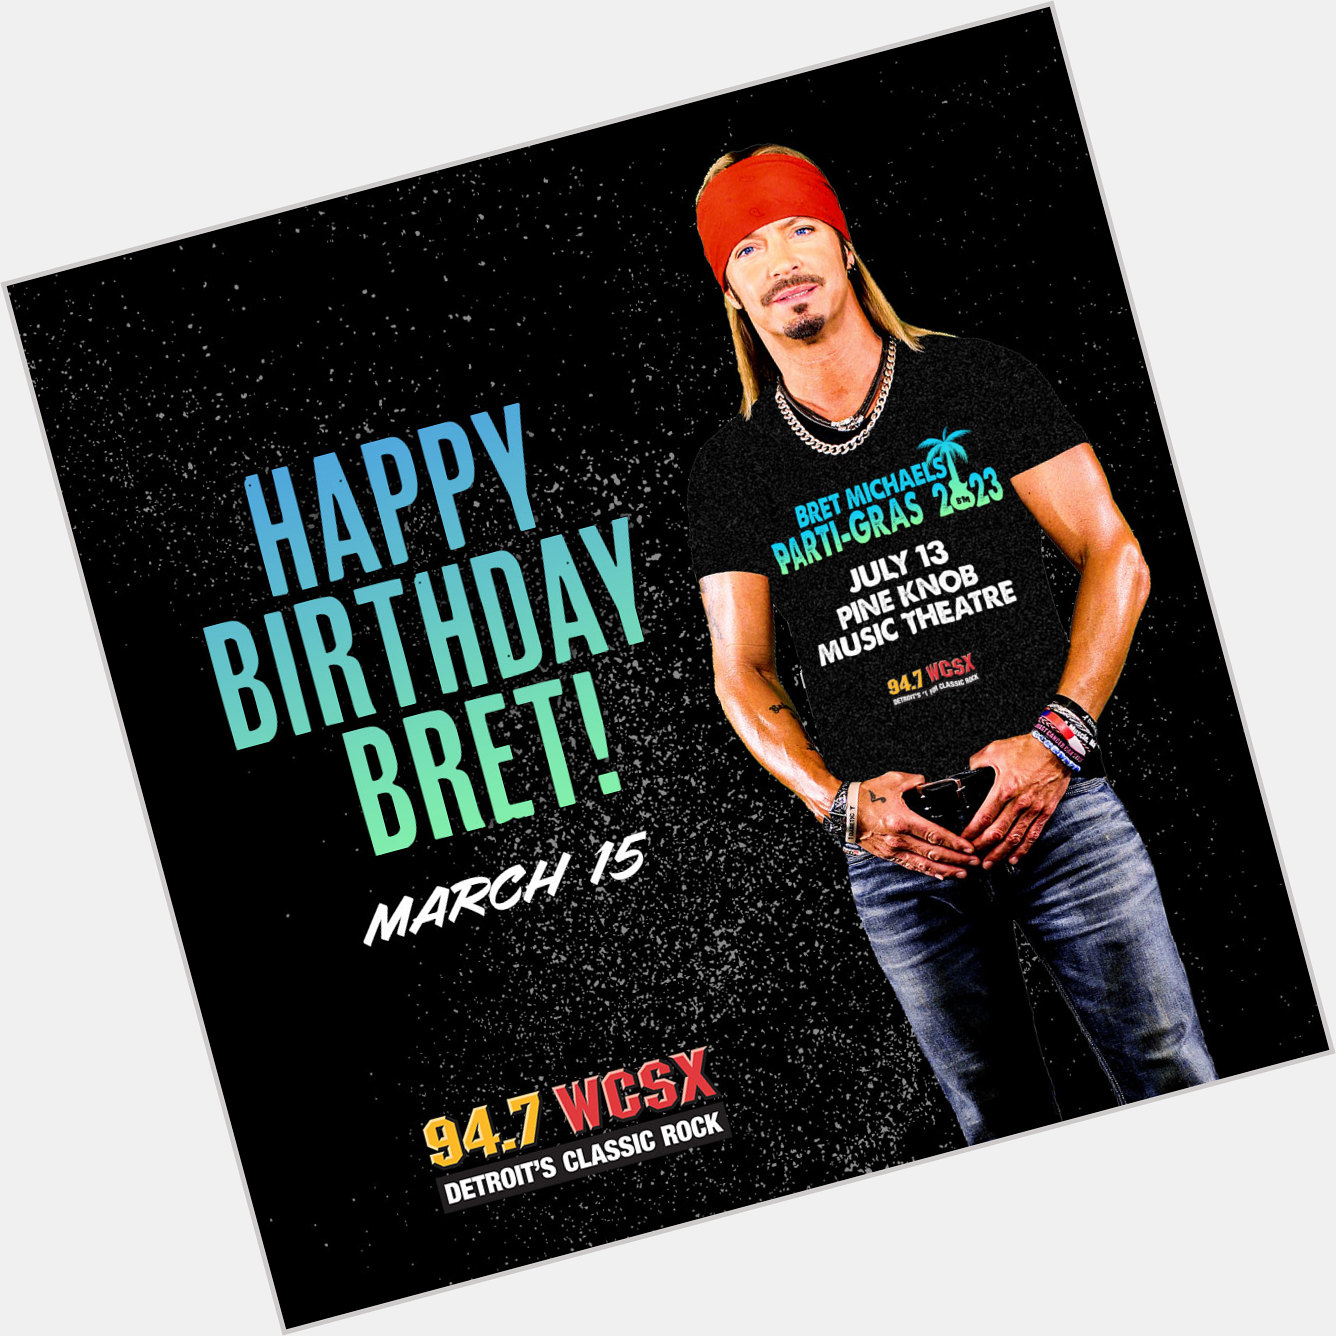 Happy Birthday to Bret Michaels from WCSX! 